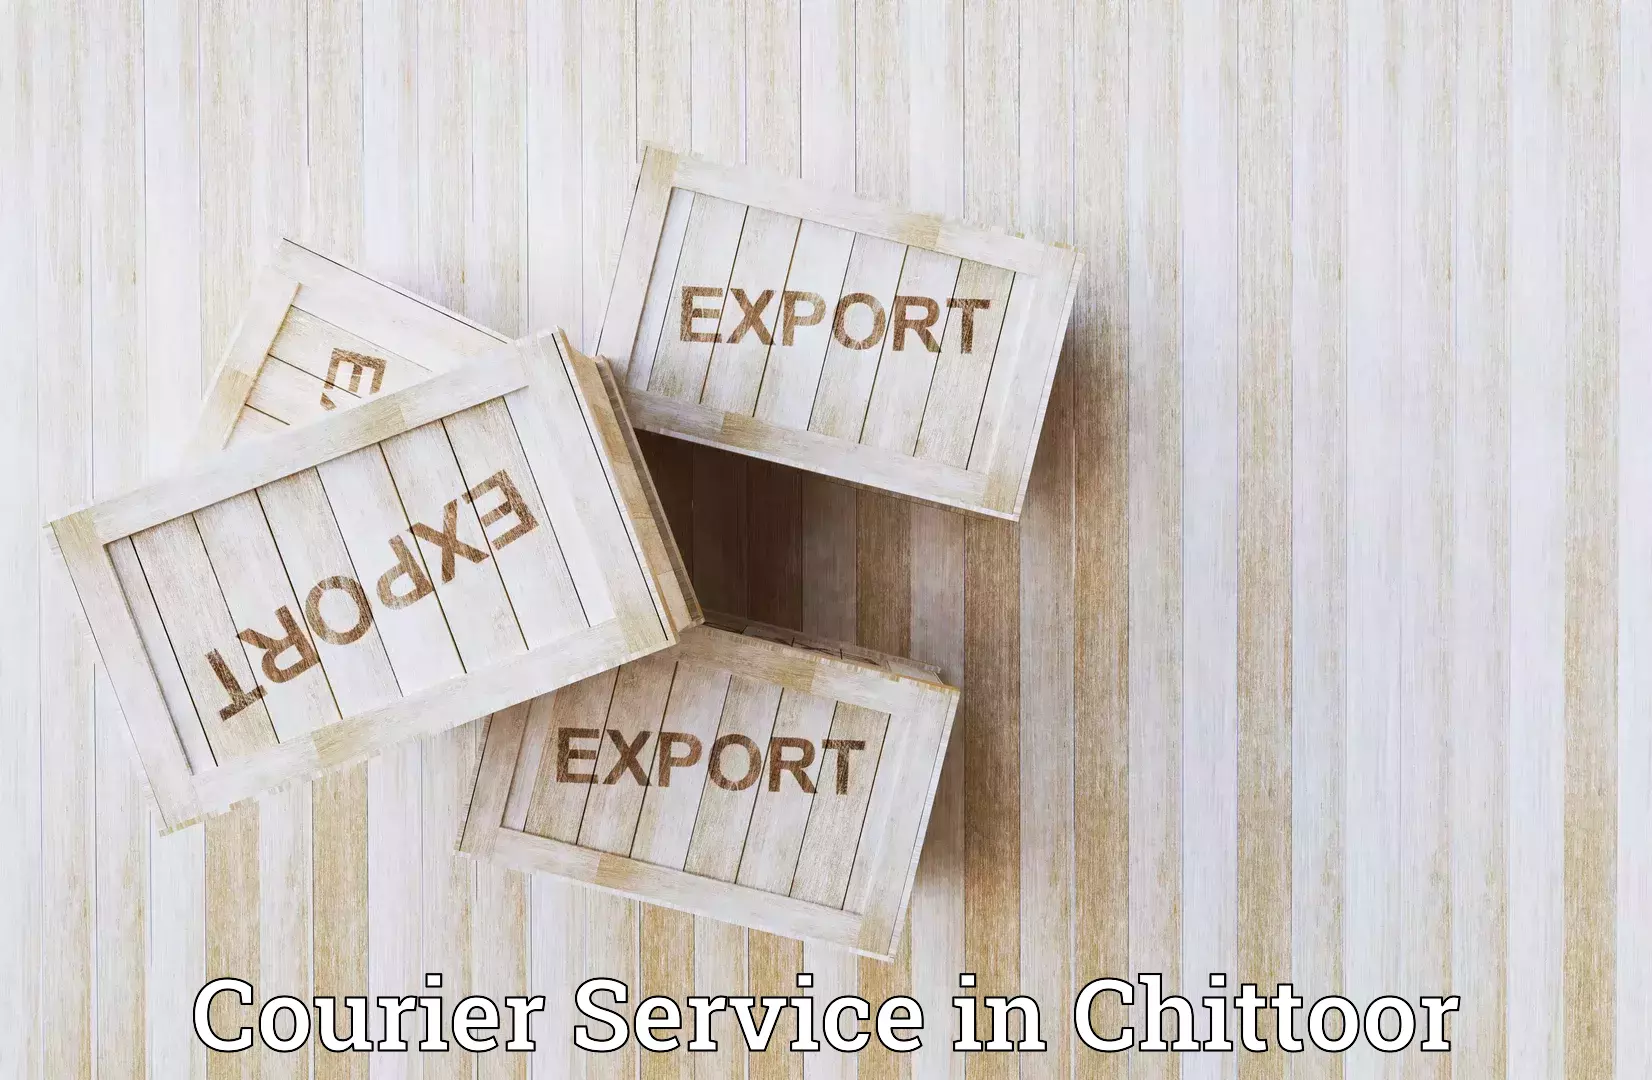 Flexible courier rates in Chittoor